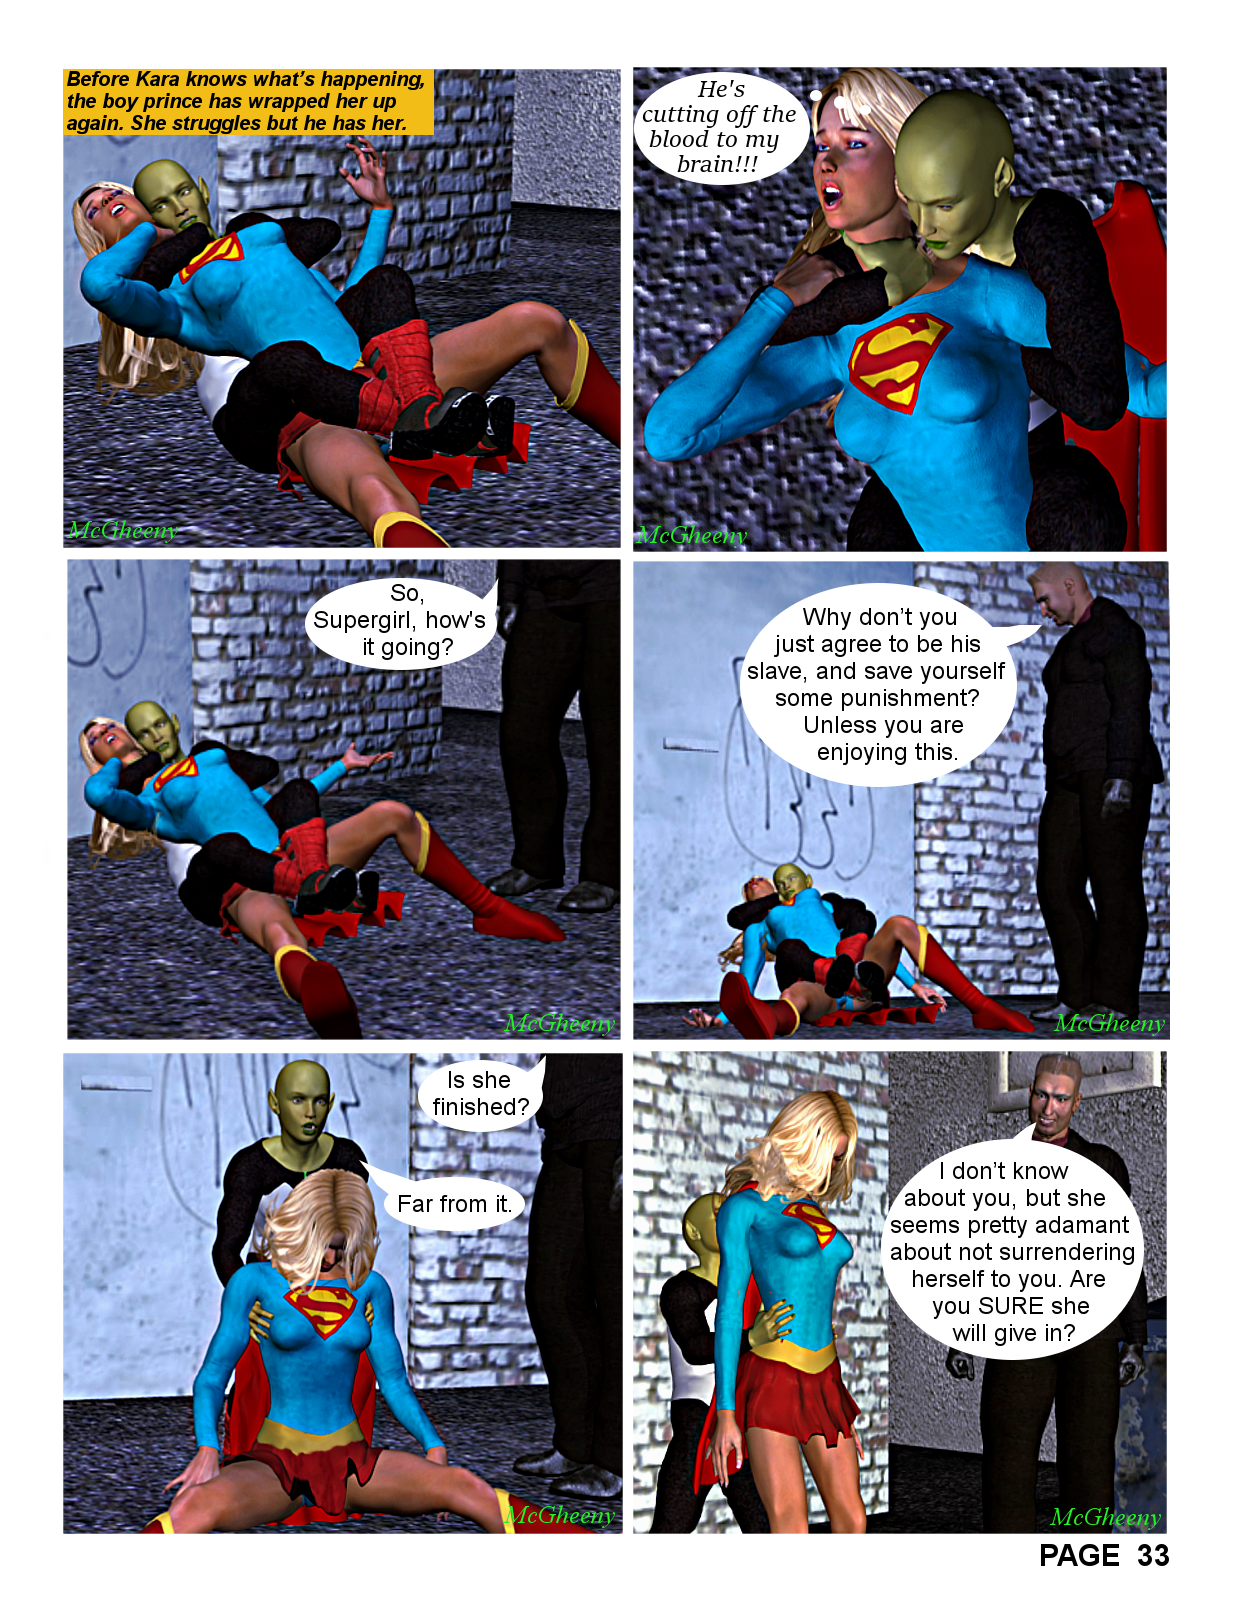 Supergirl in Banors Prize Page 33.png